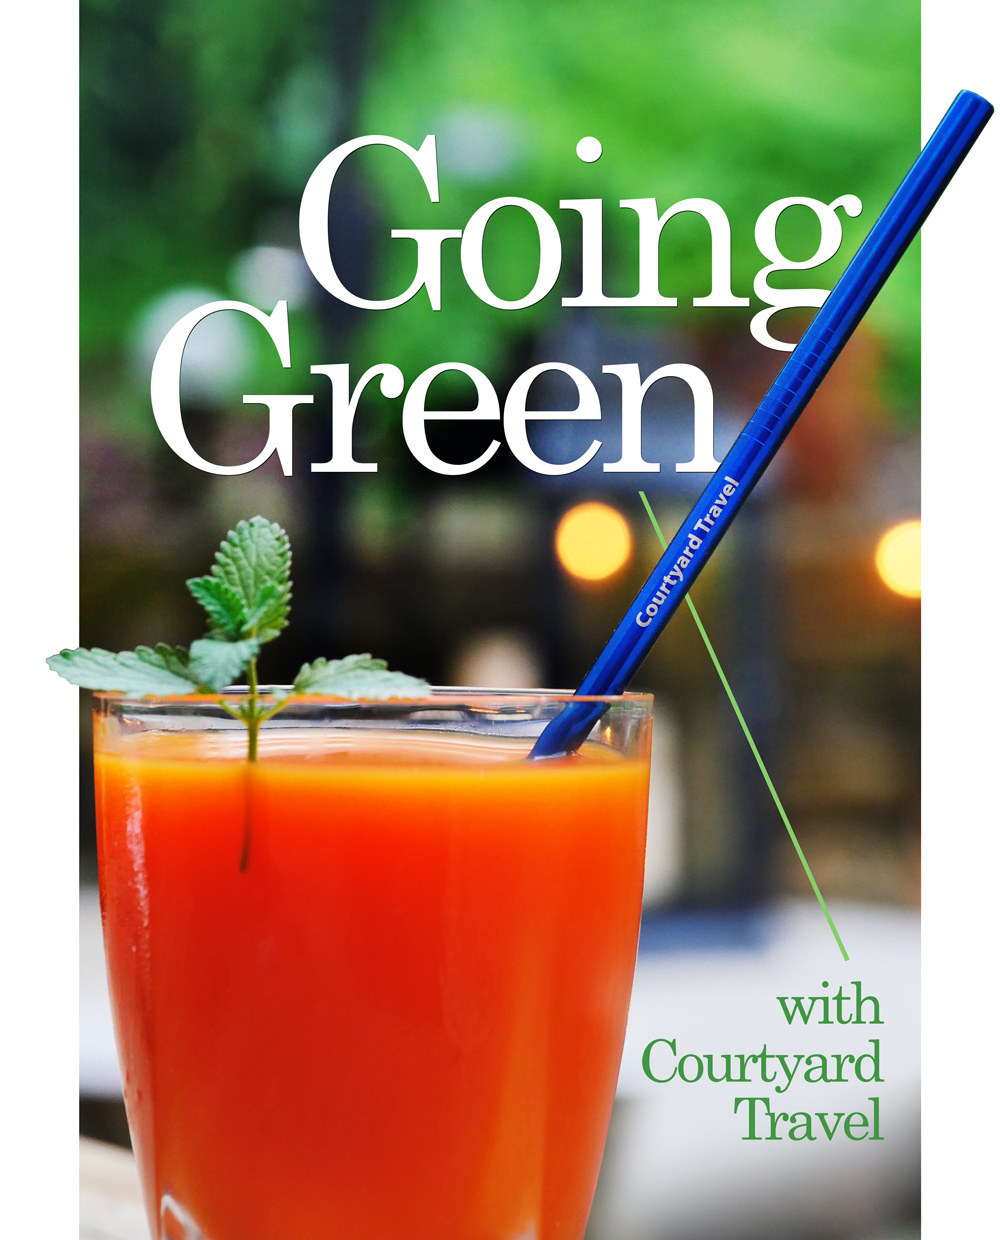 Going Green at Courtyard Travel